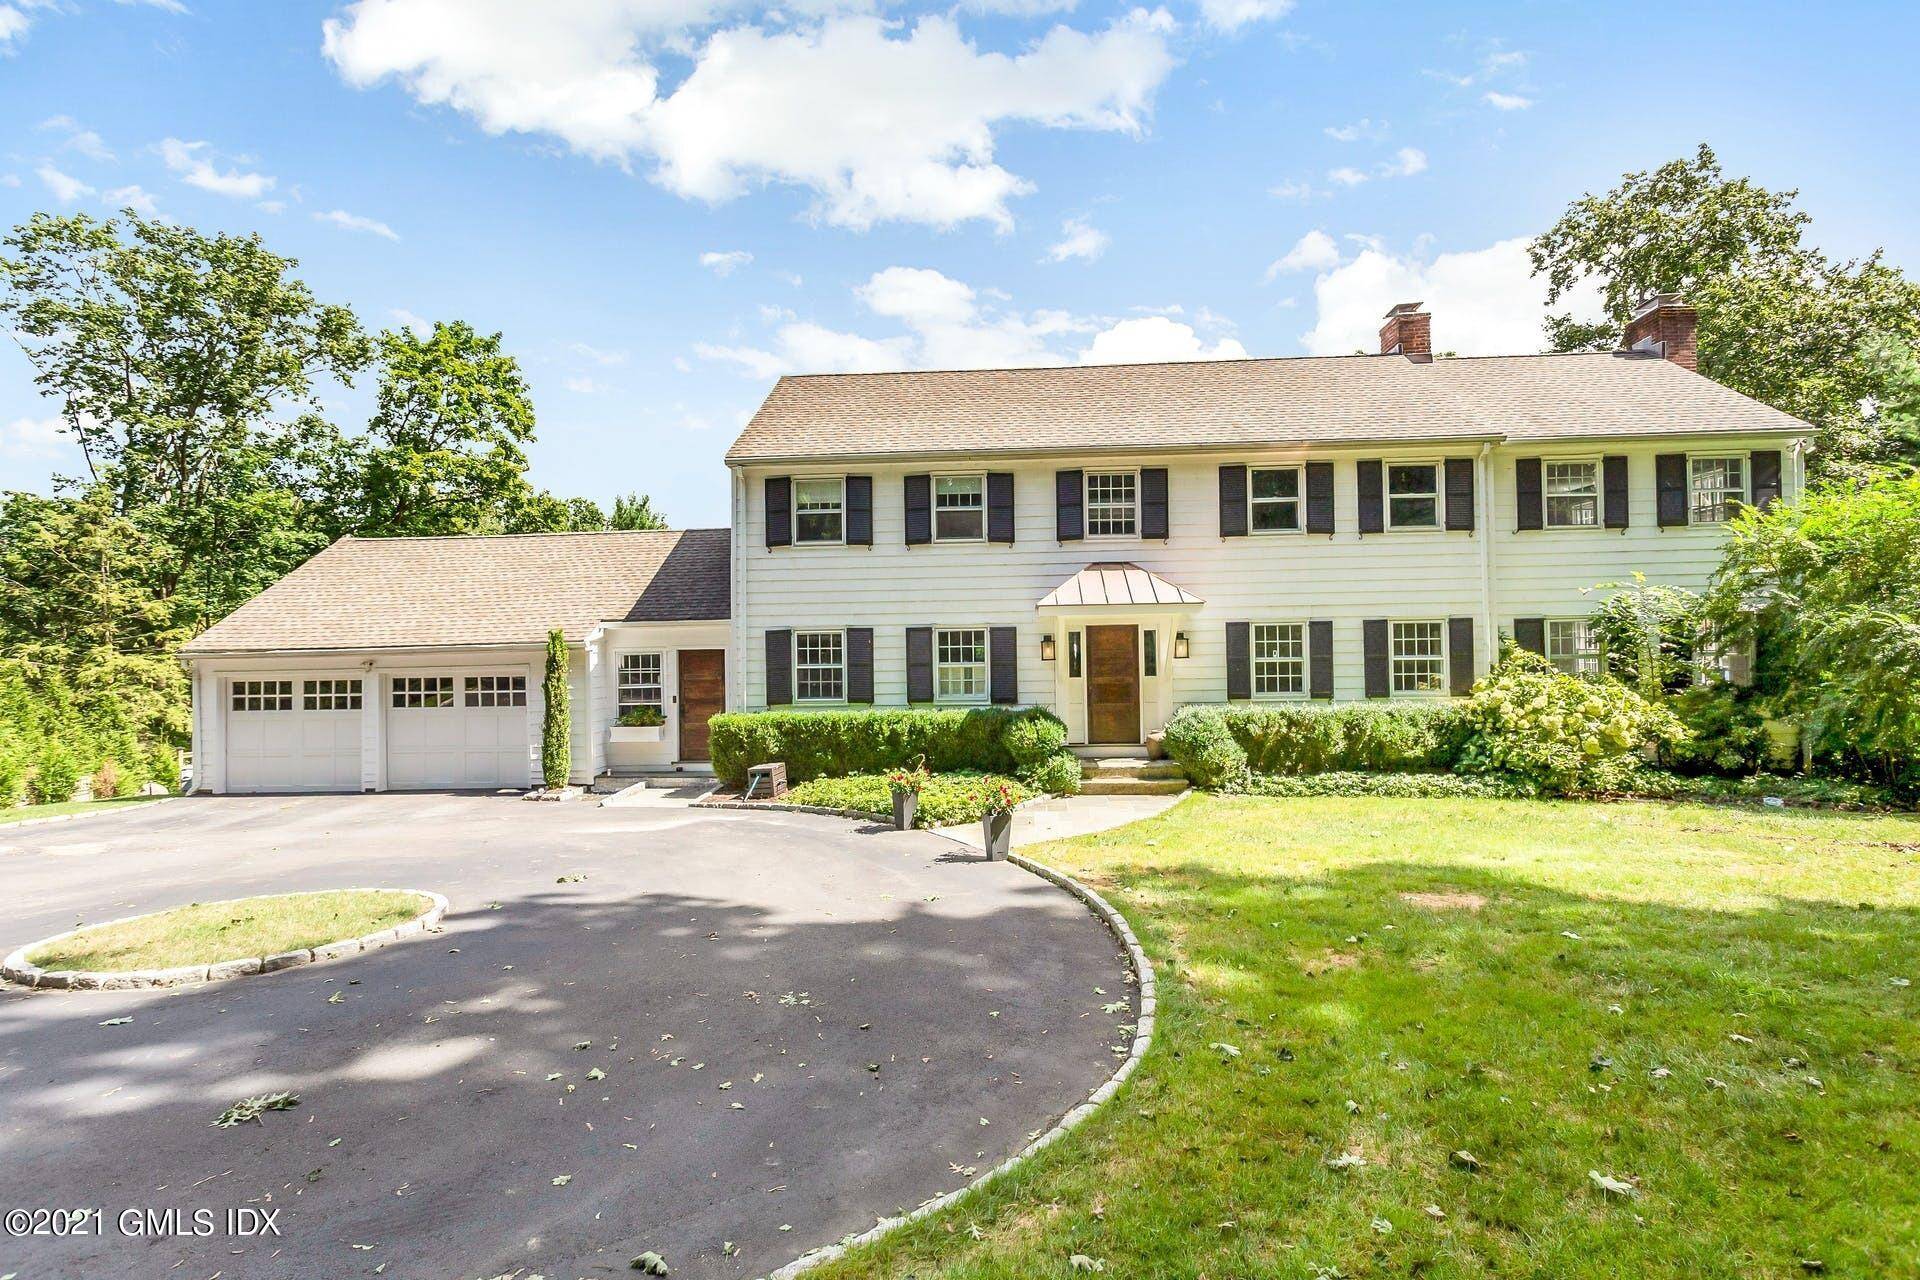 Beautifully renovated 5 bedroom Colonial on a quiet mid country cul de sac in the North Street school district with lovely pool.